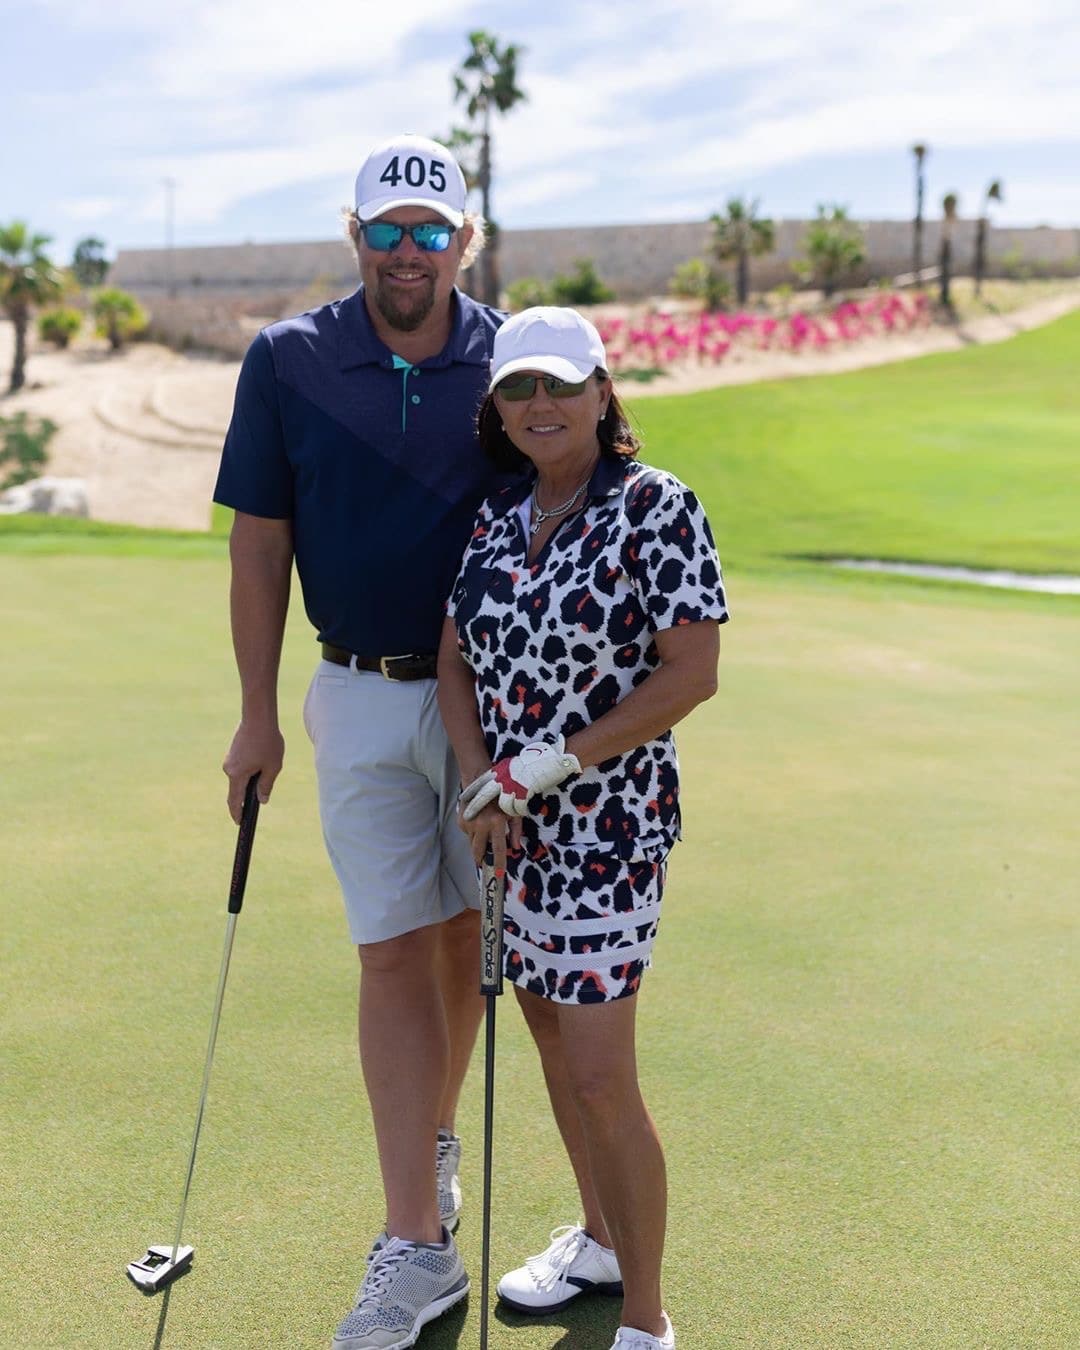 Toby Keith and wife playing golf.